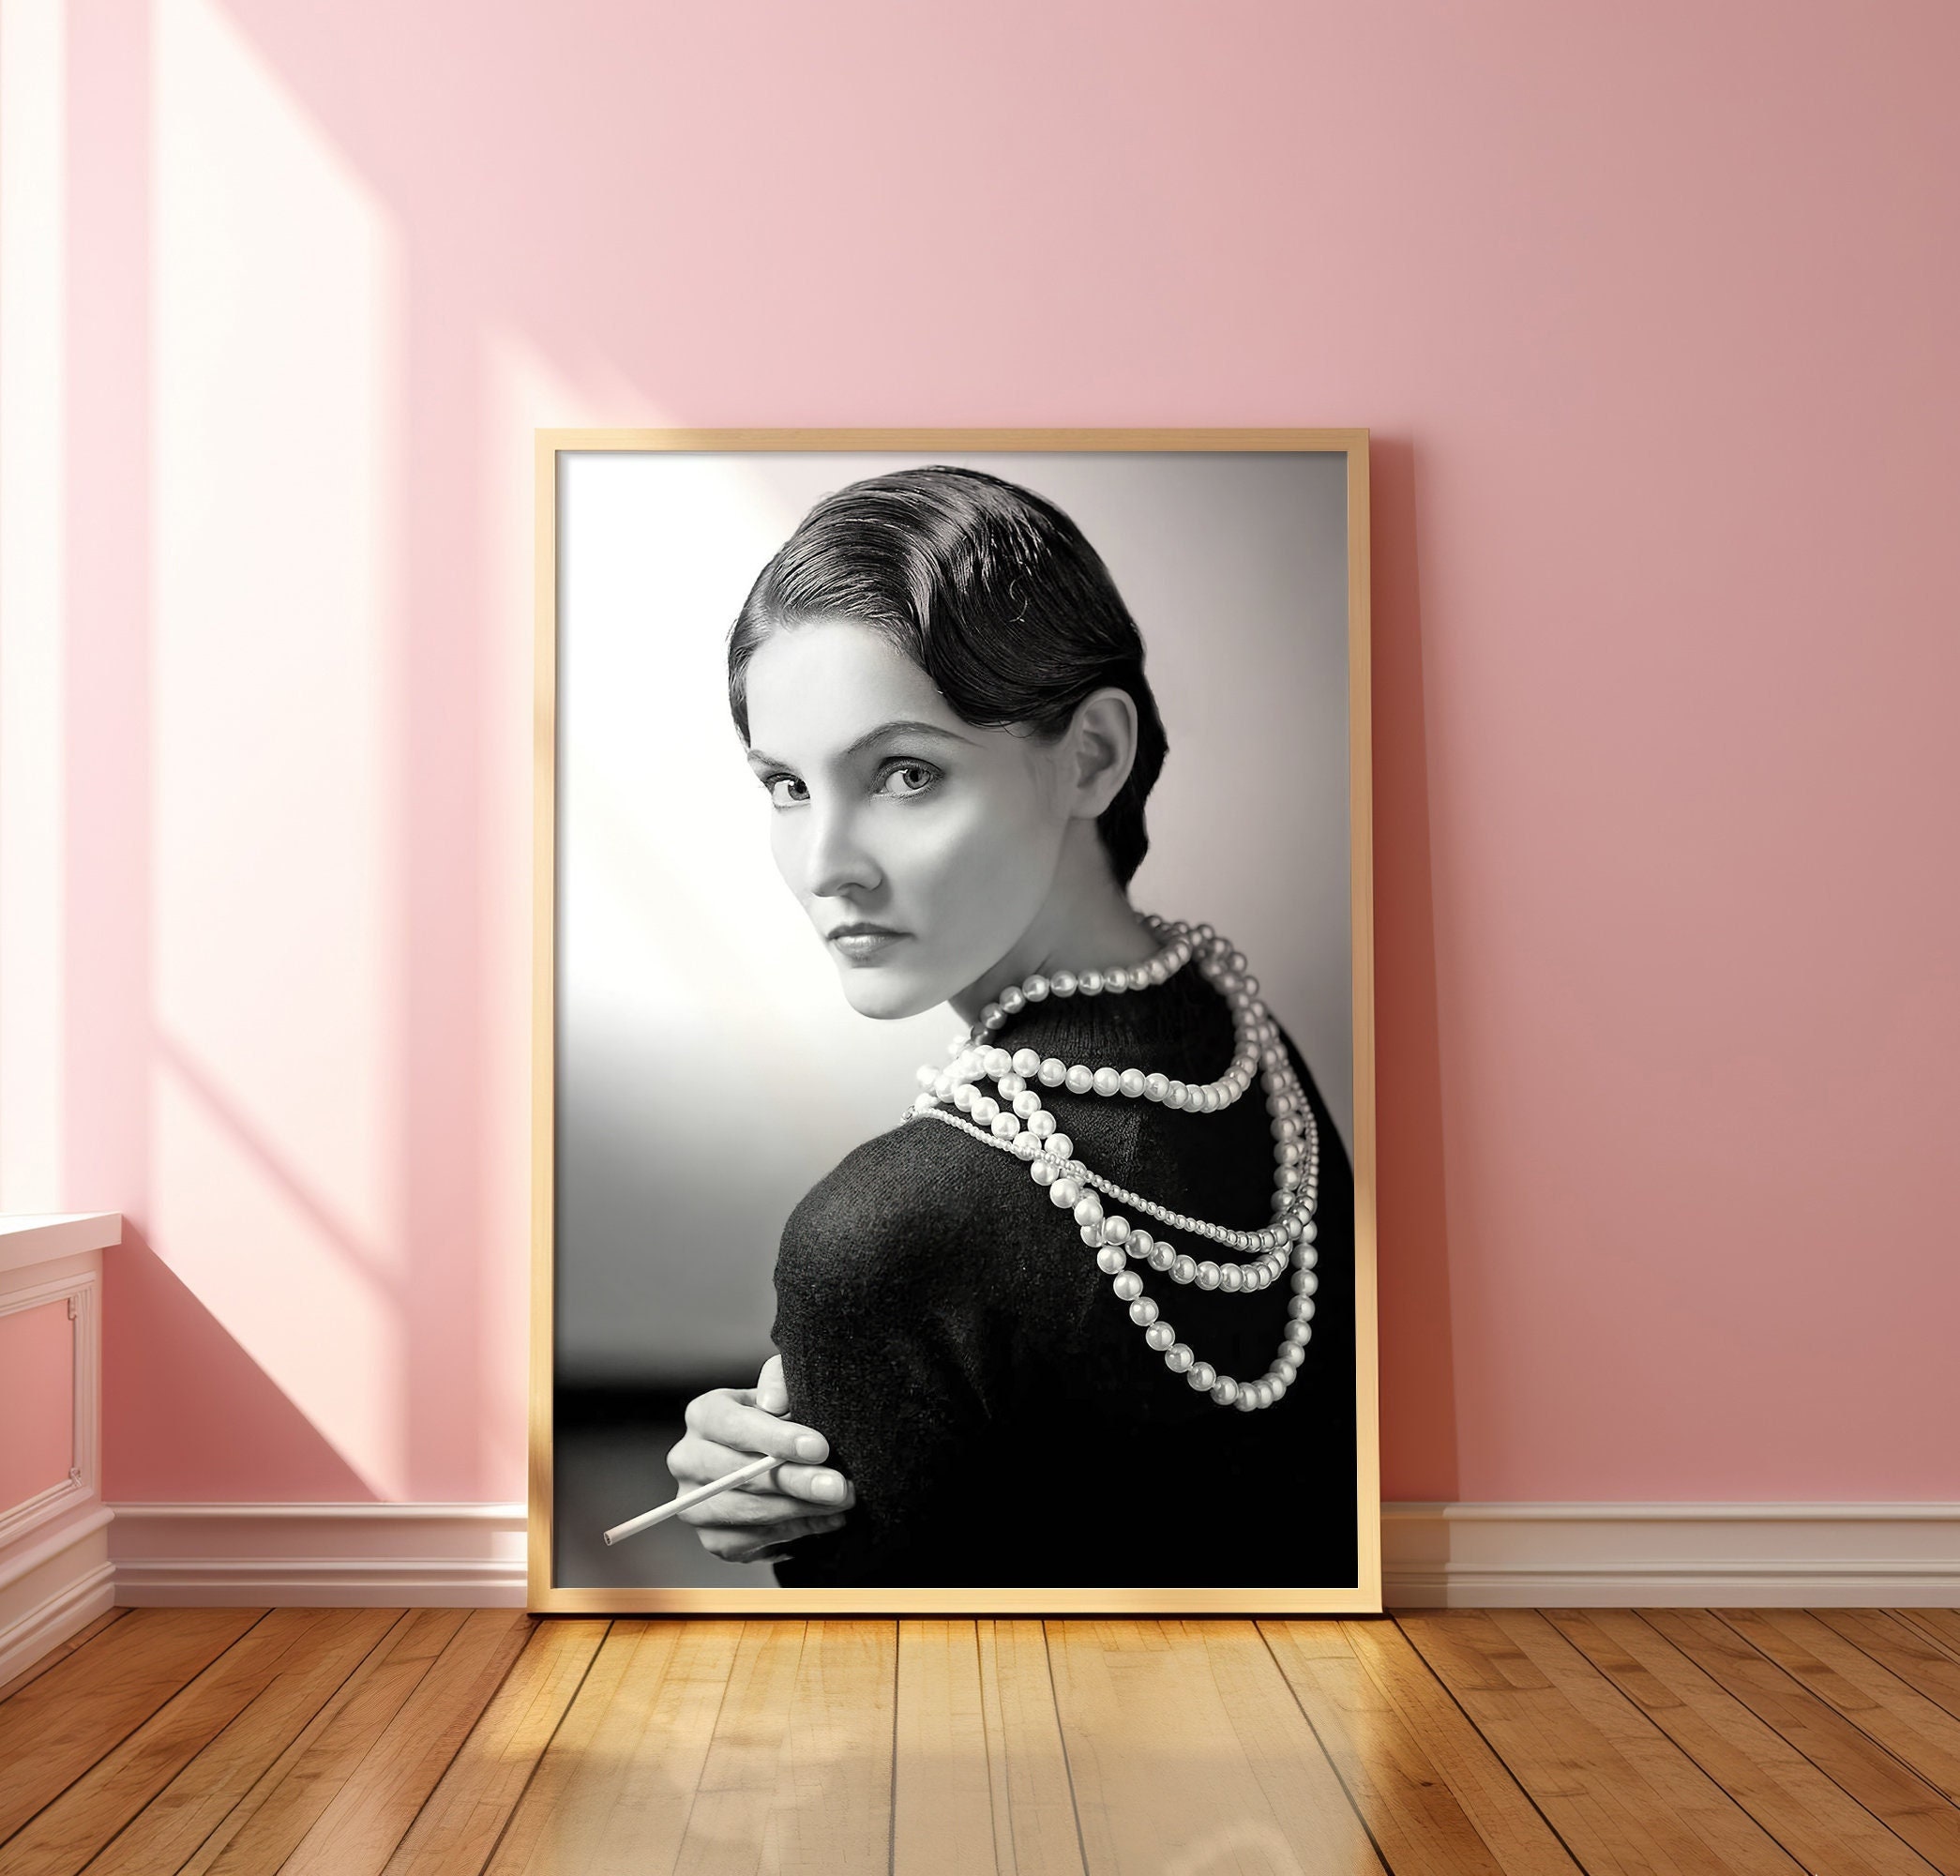 2+ Thousand Coco Chanel Royalty-Free Images, Stock Photos